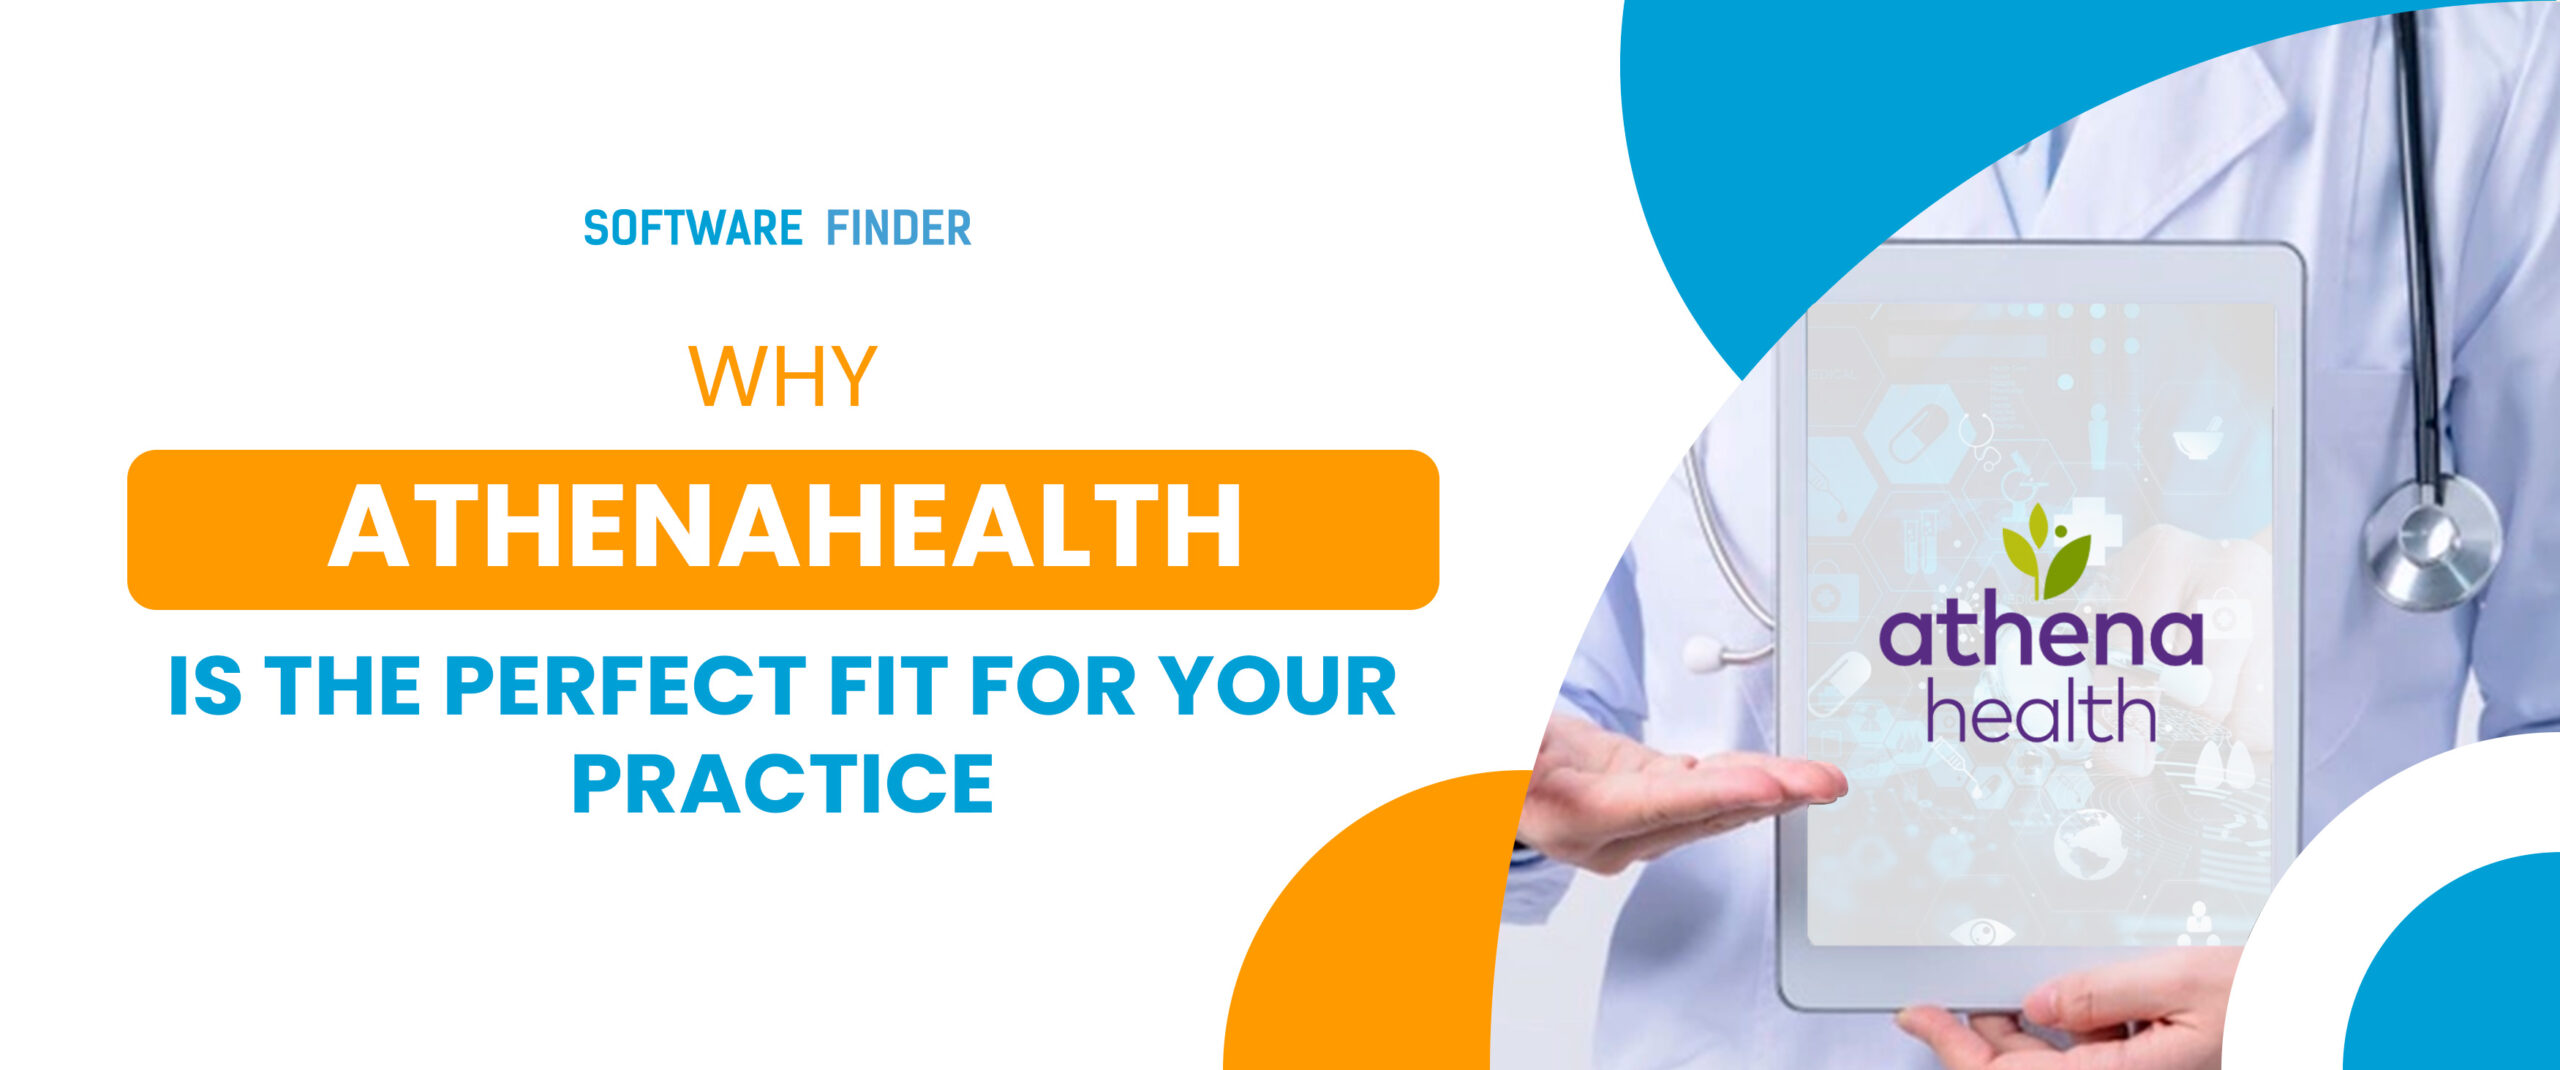 Why Athenahealth is the Perfect Fit for Your Practice